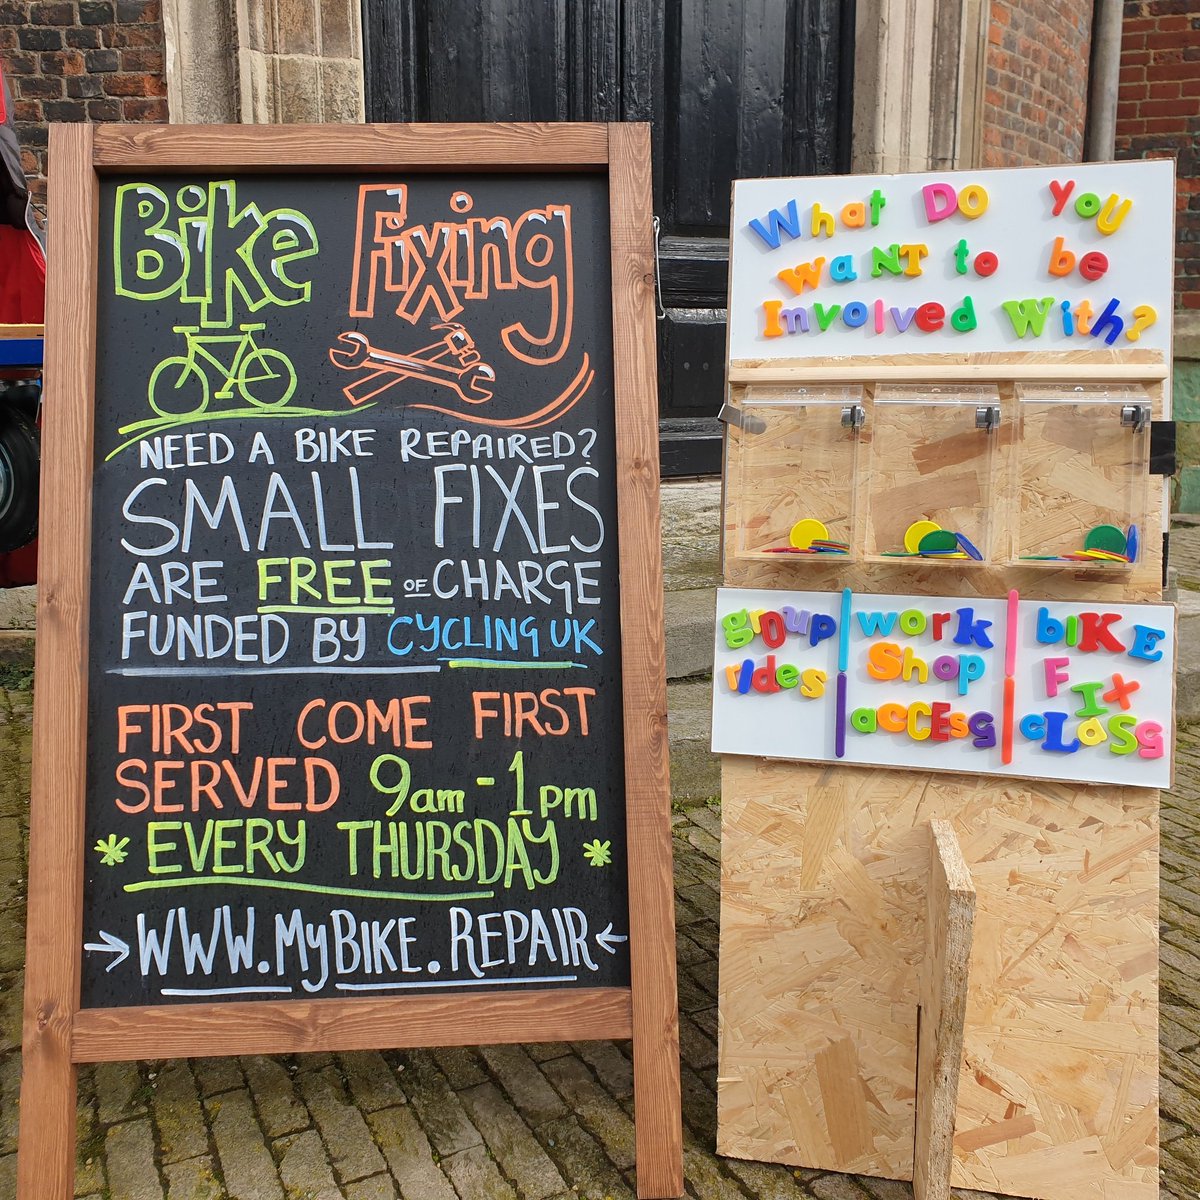 Give your bike some much needed tlc!
Get down to St George's before 3pm today and visit @mybikerepair